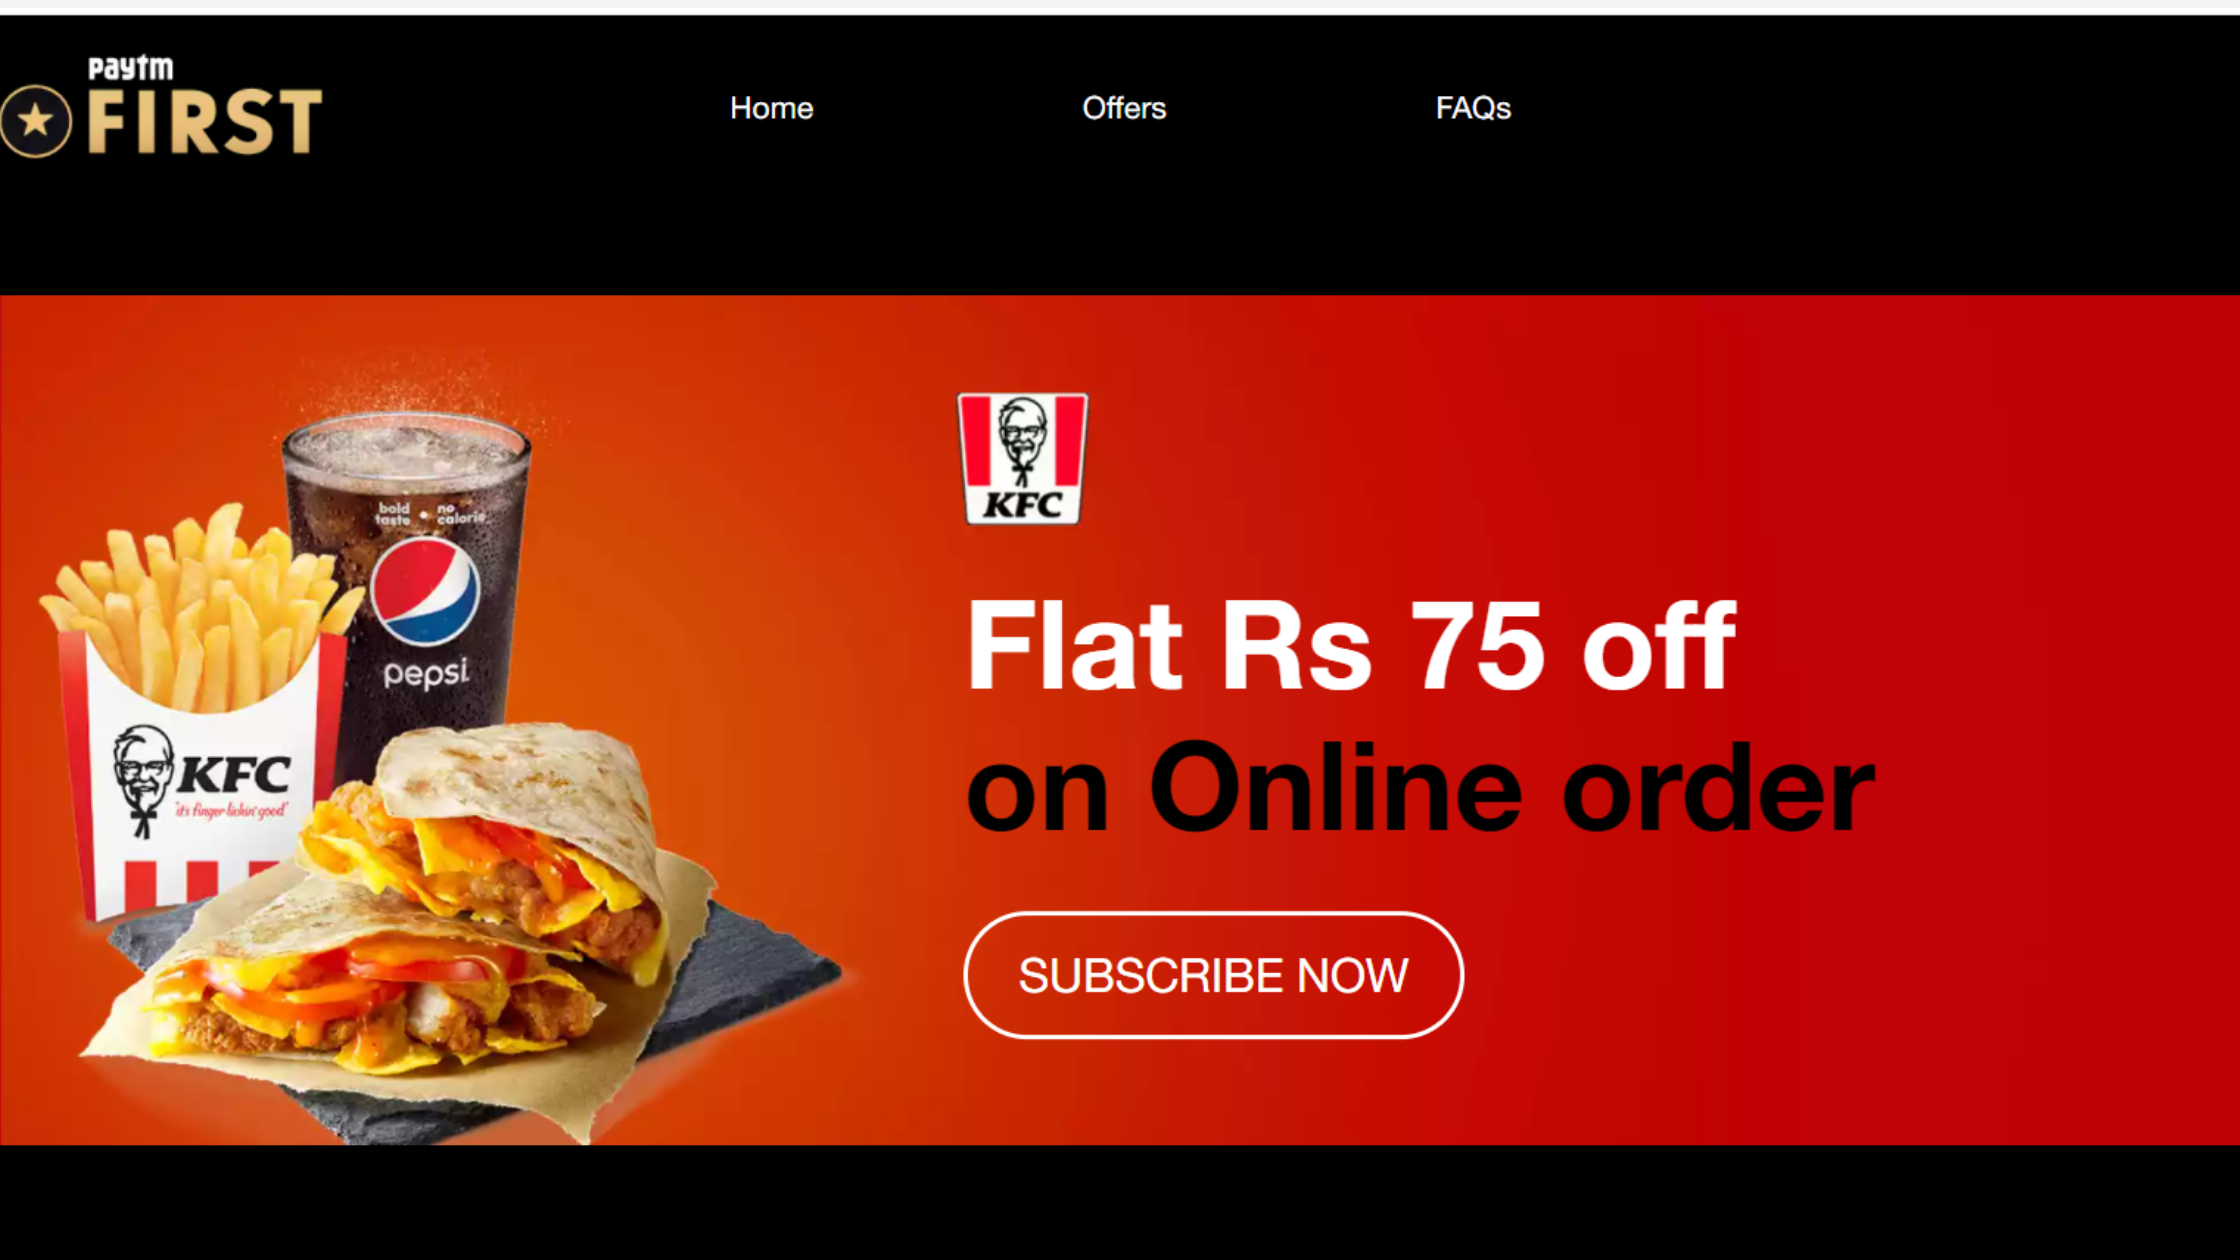 Paytm KFC Offer: Get a Flat Rs. 75 off on Joining First Subscription